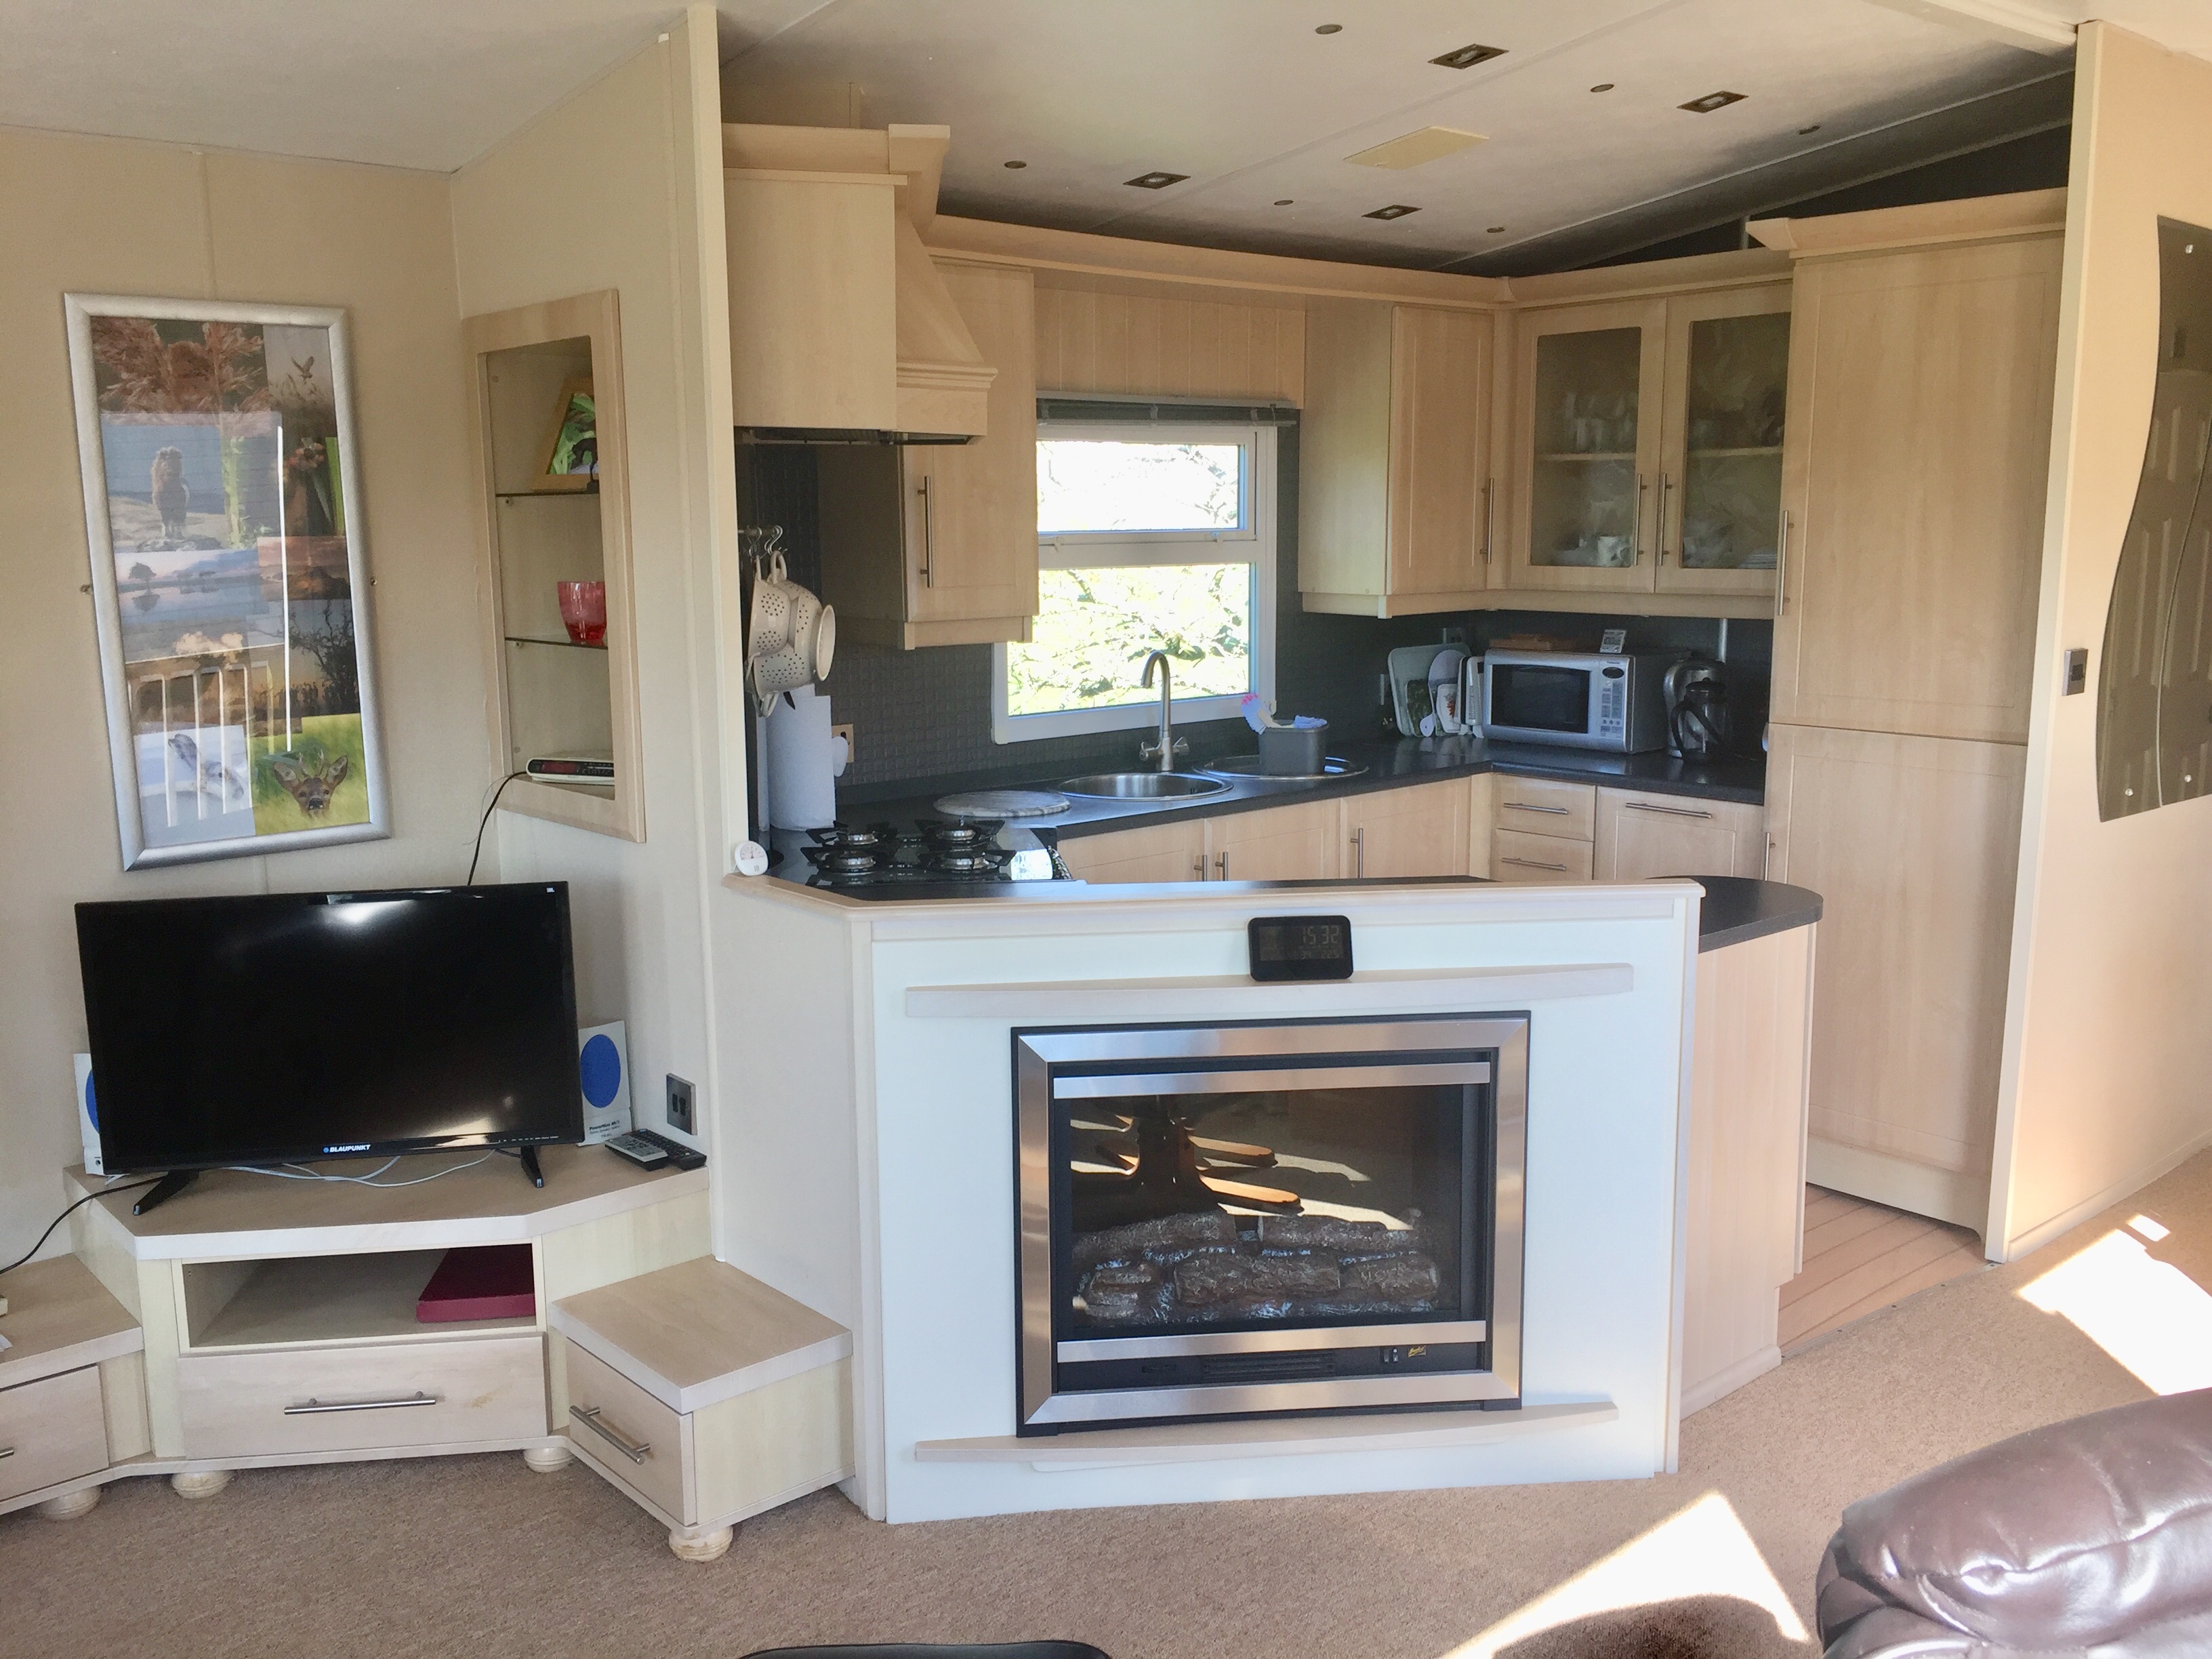 The 2007 Cosalt Studio Extra is now ready to view at Smytham Holiday Park in North Devon